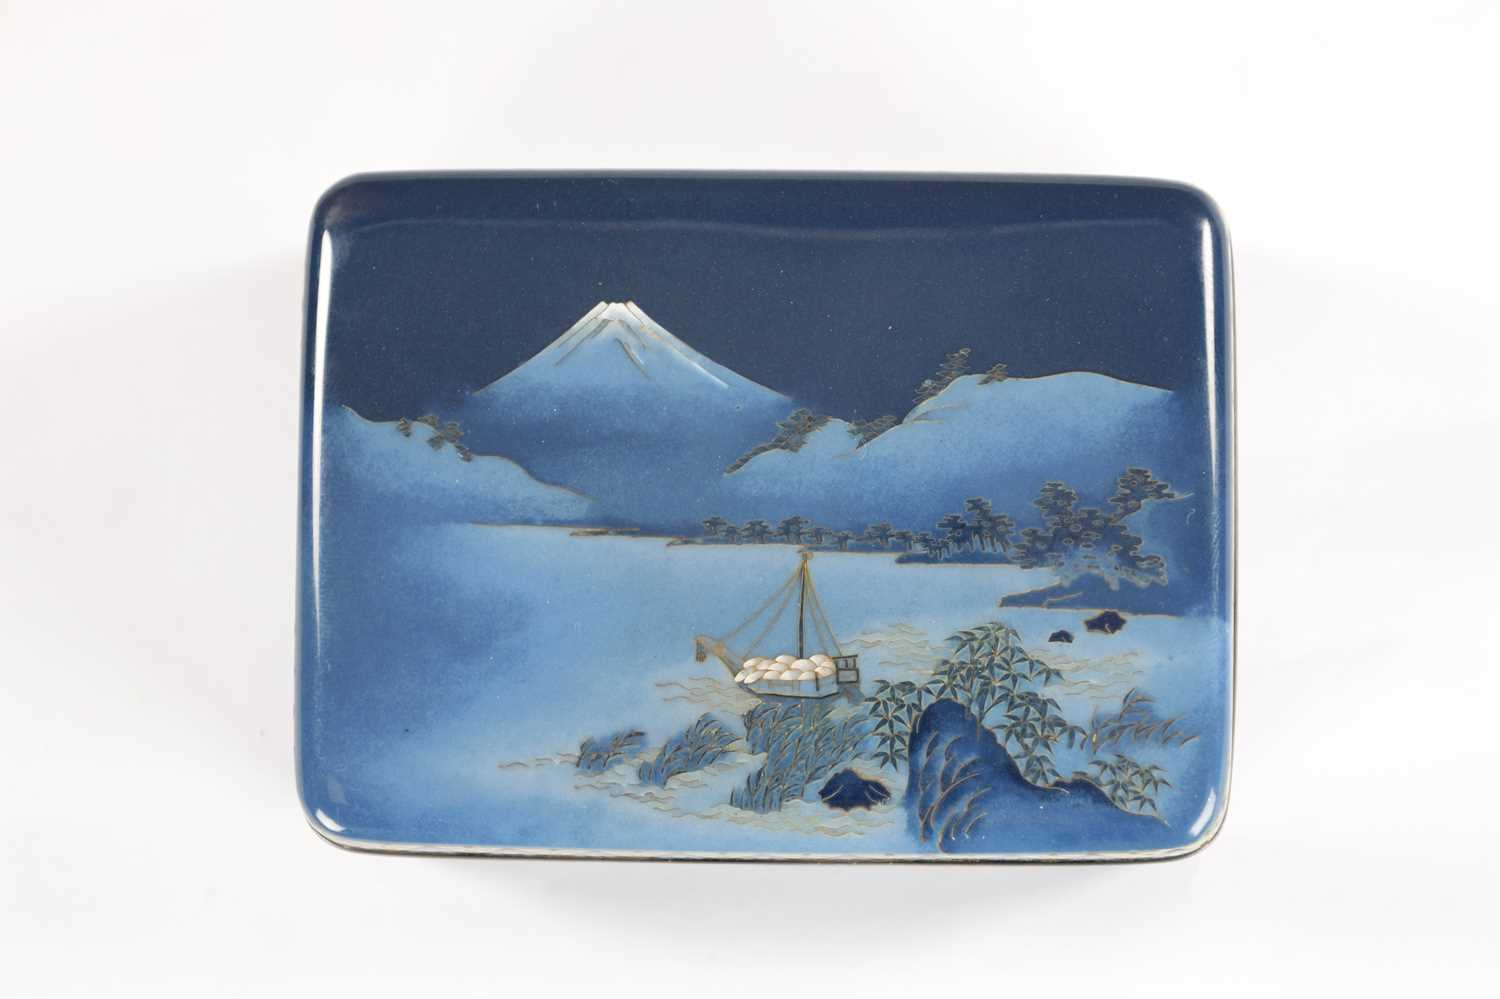 A LATE 19TH CENTURY JAPANESE CLOISONNE ENAMEL BOX AND COVER BY HAYASHI KODENJI - Image 2 of 8